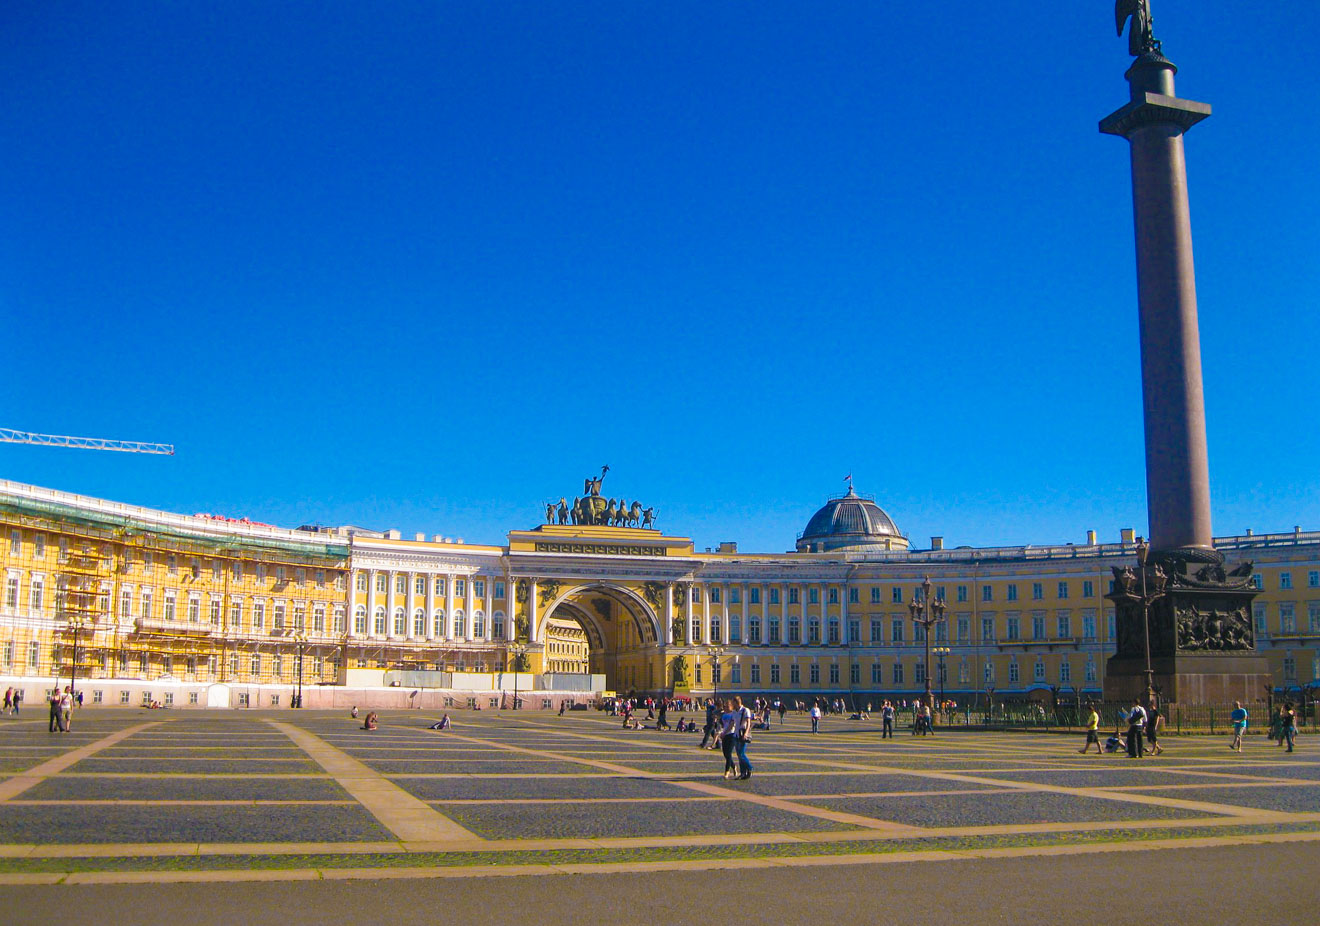 Top 11 Things To Do In Saint Petersburg Russia palace square